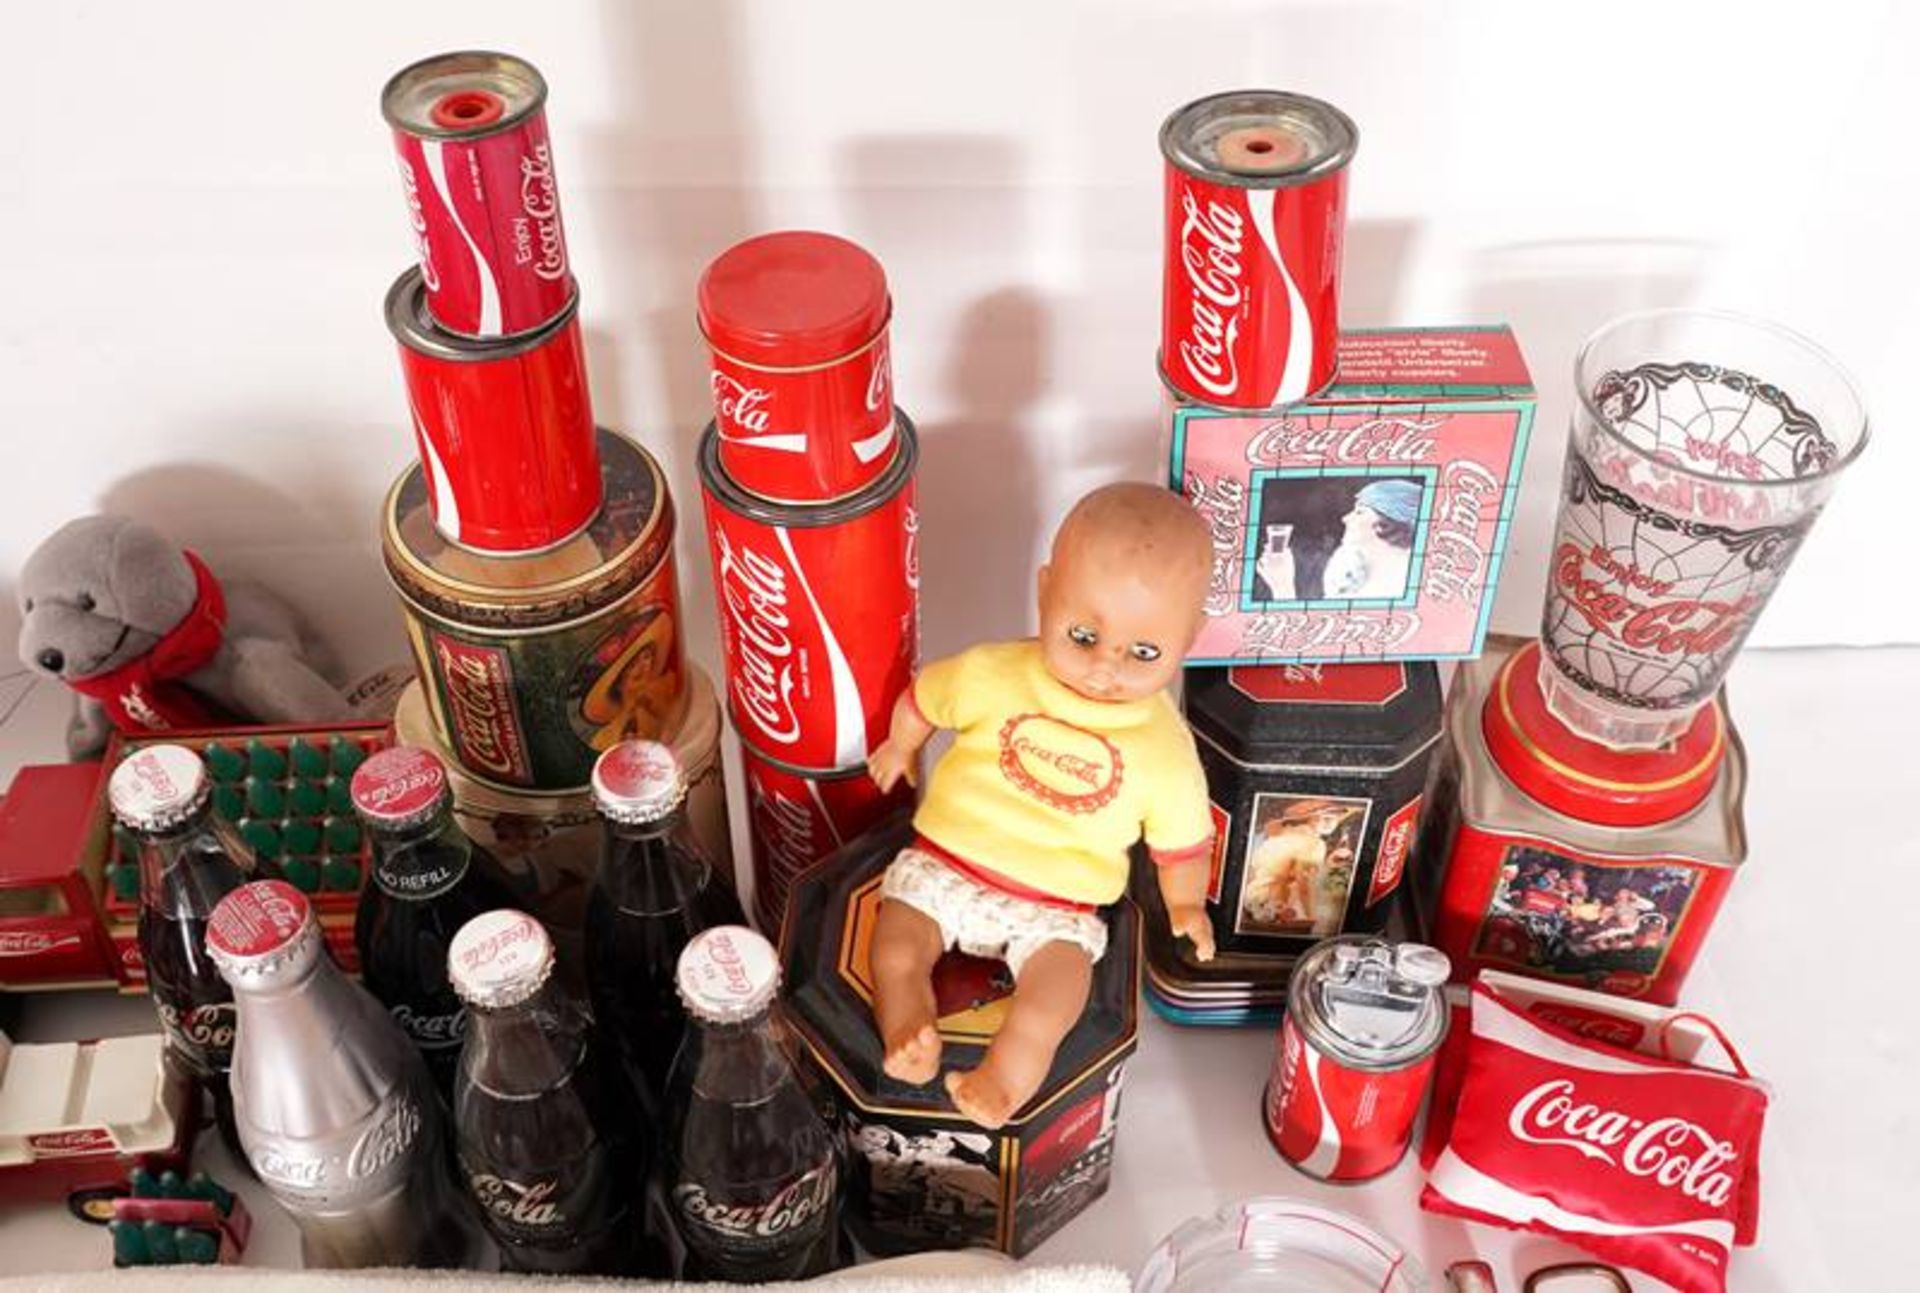 Convolute of Coca-Cola promotional items - Image 4 of 4